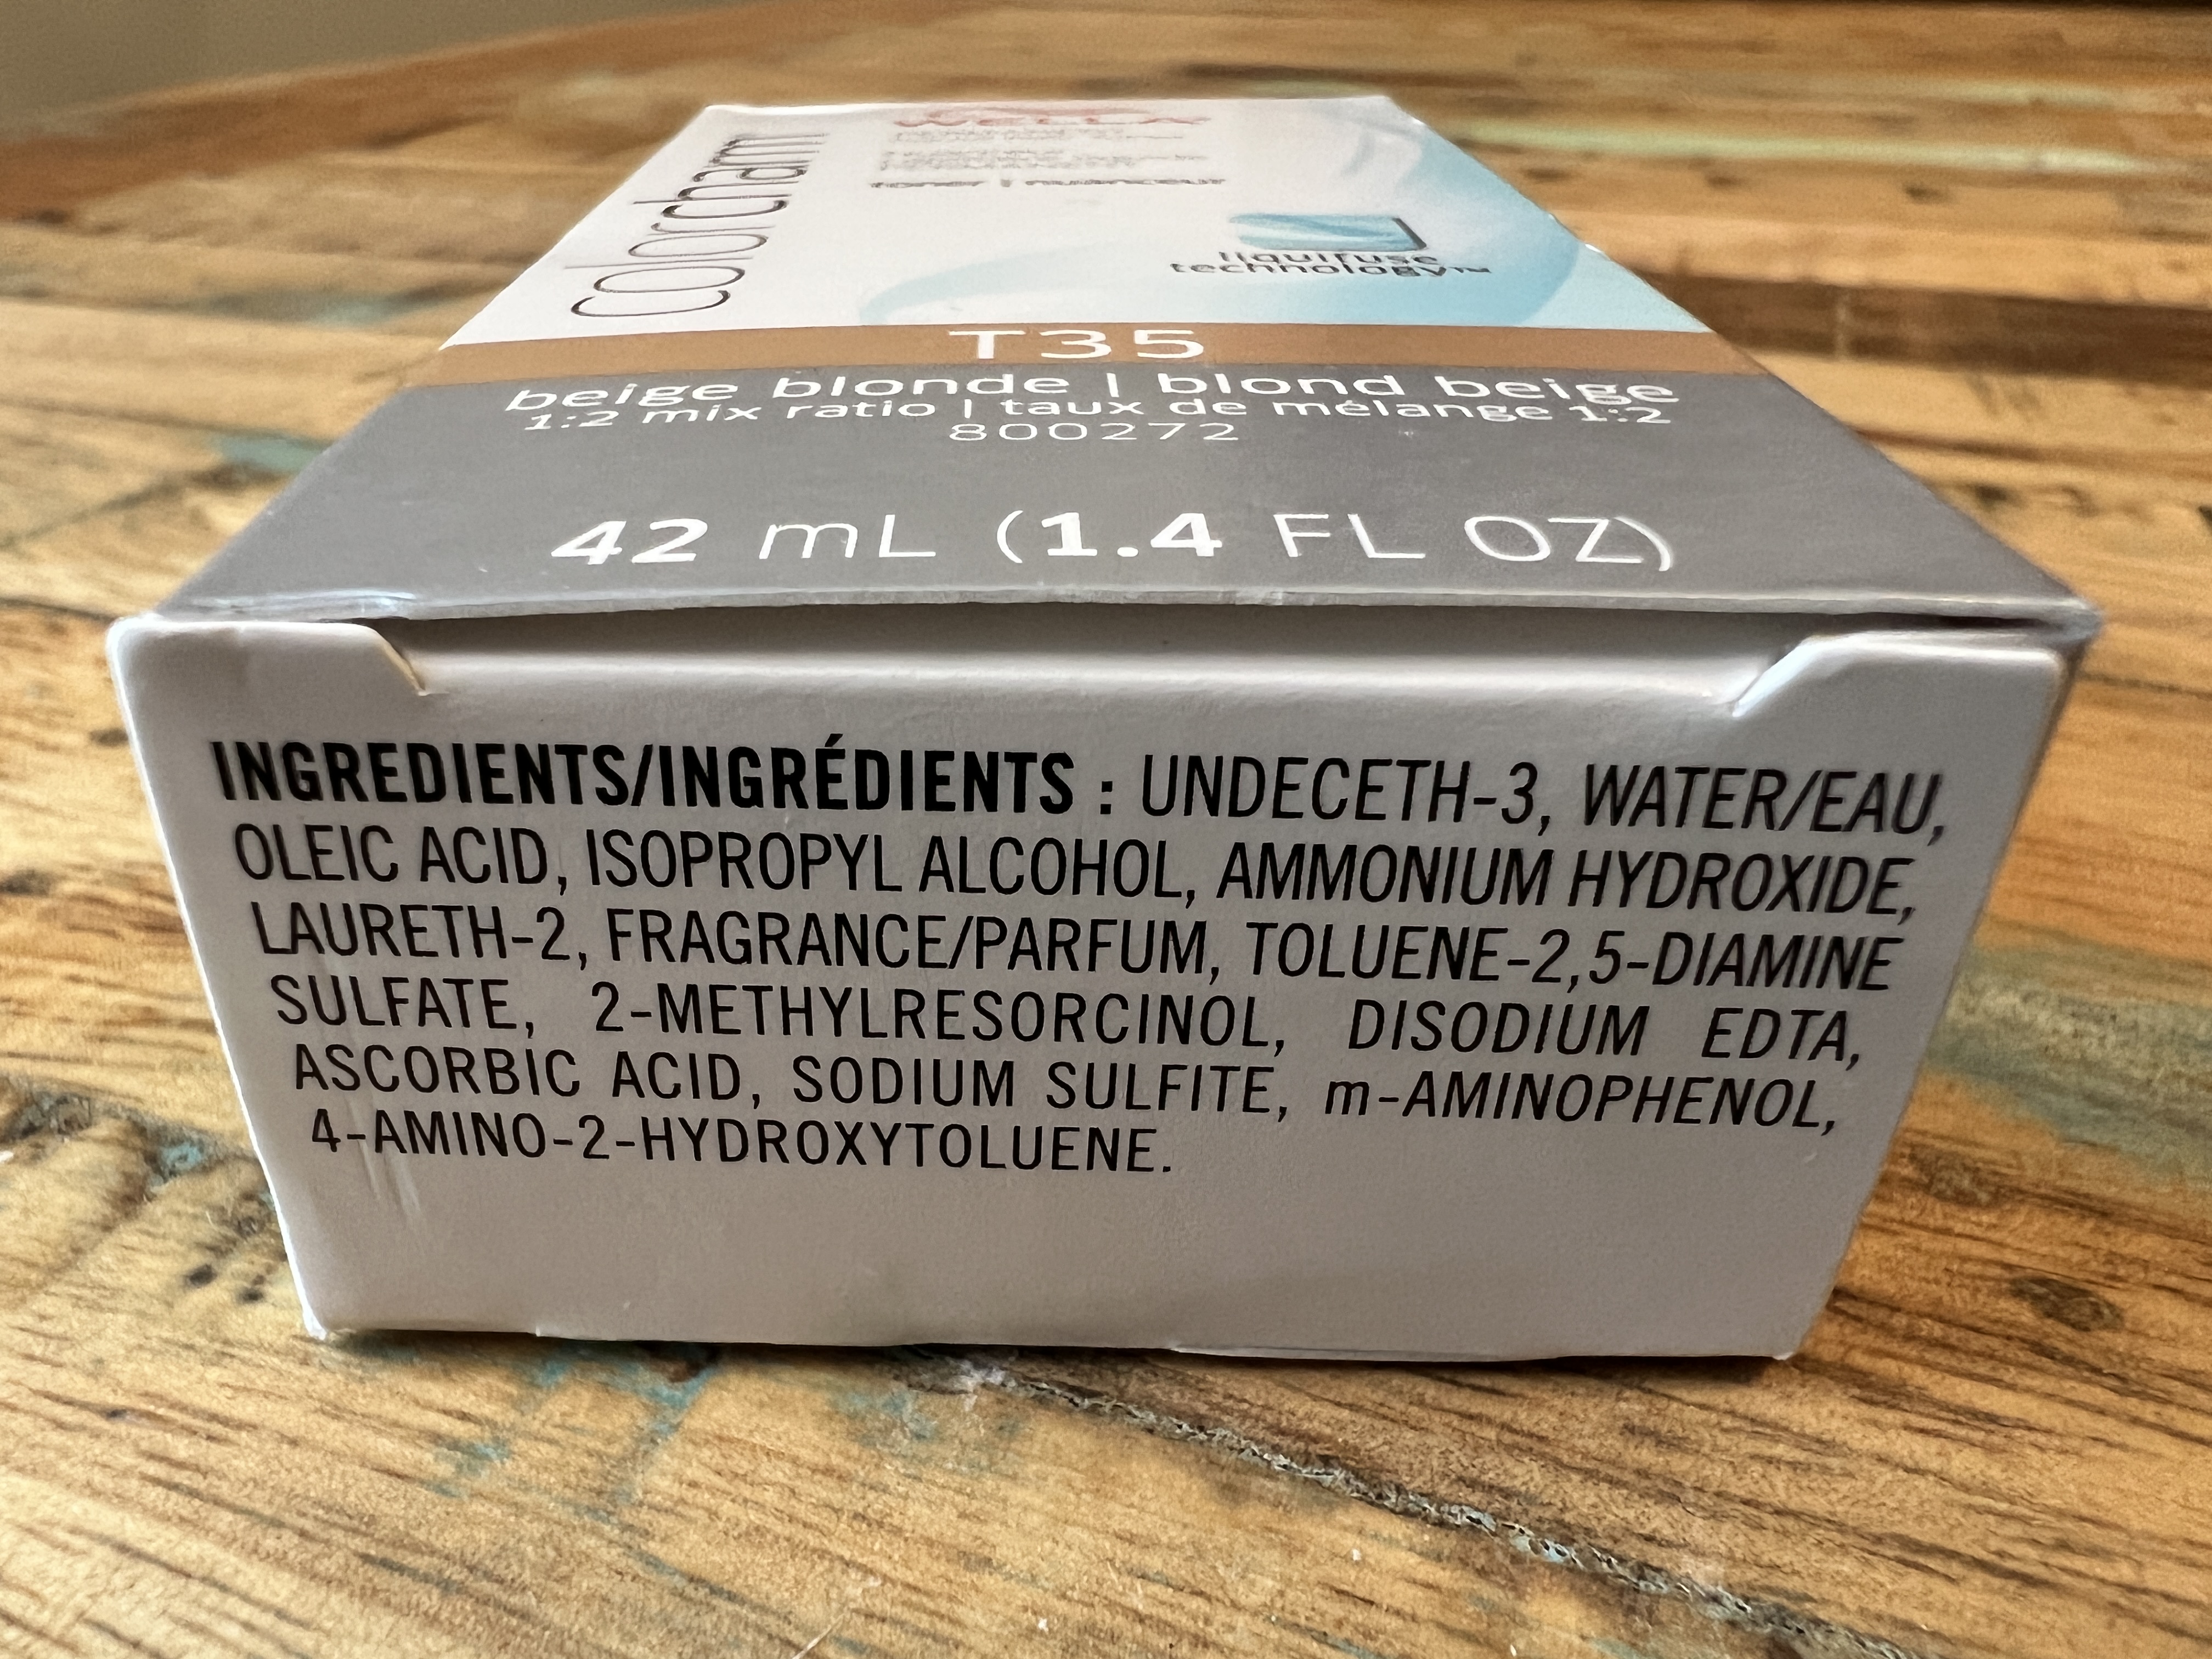 The bottom of the box shows Wella T35 ingredients.